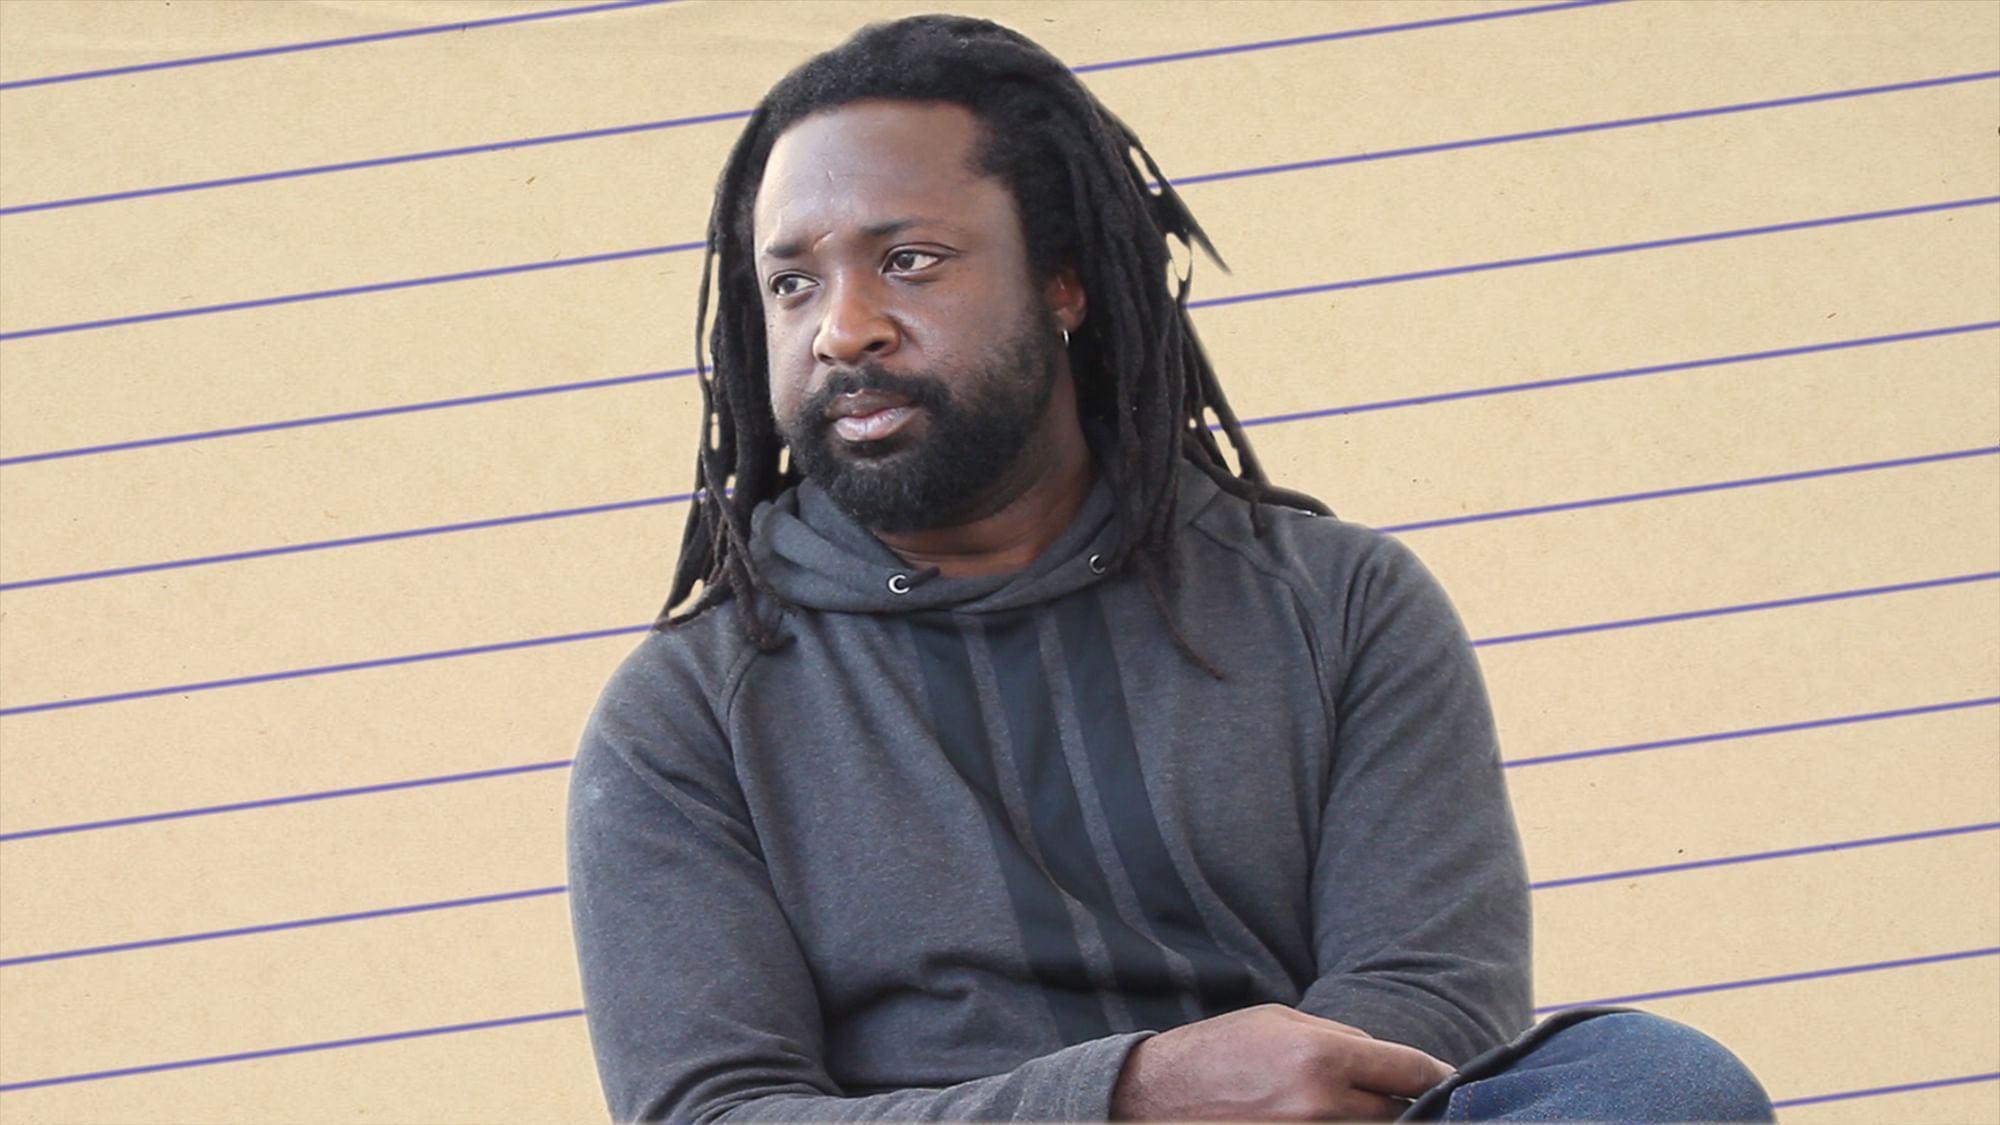 <b>The Quint</b> caught up with the 2015 Man Booker Prize winner Marlon James at the Jaipur Literature Festival. (Photo: <b>The Quint</b>)